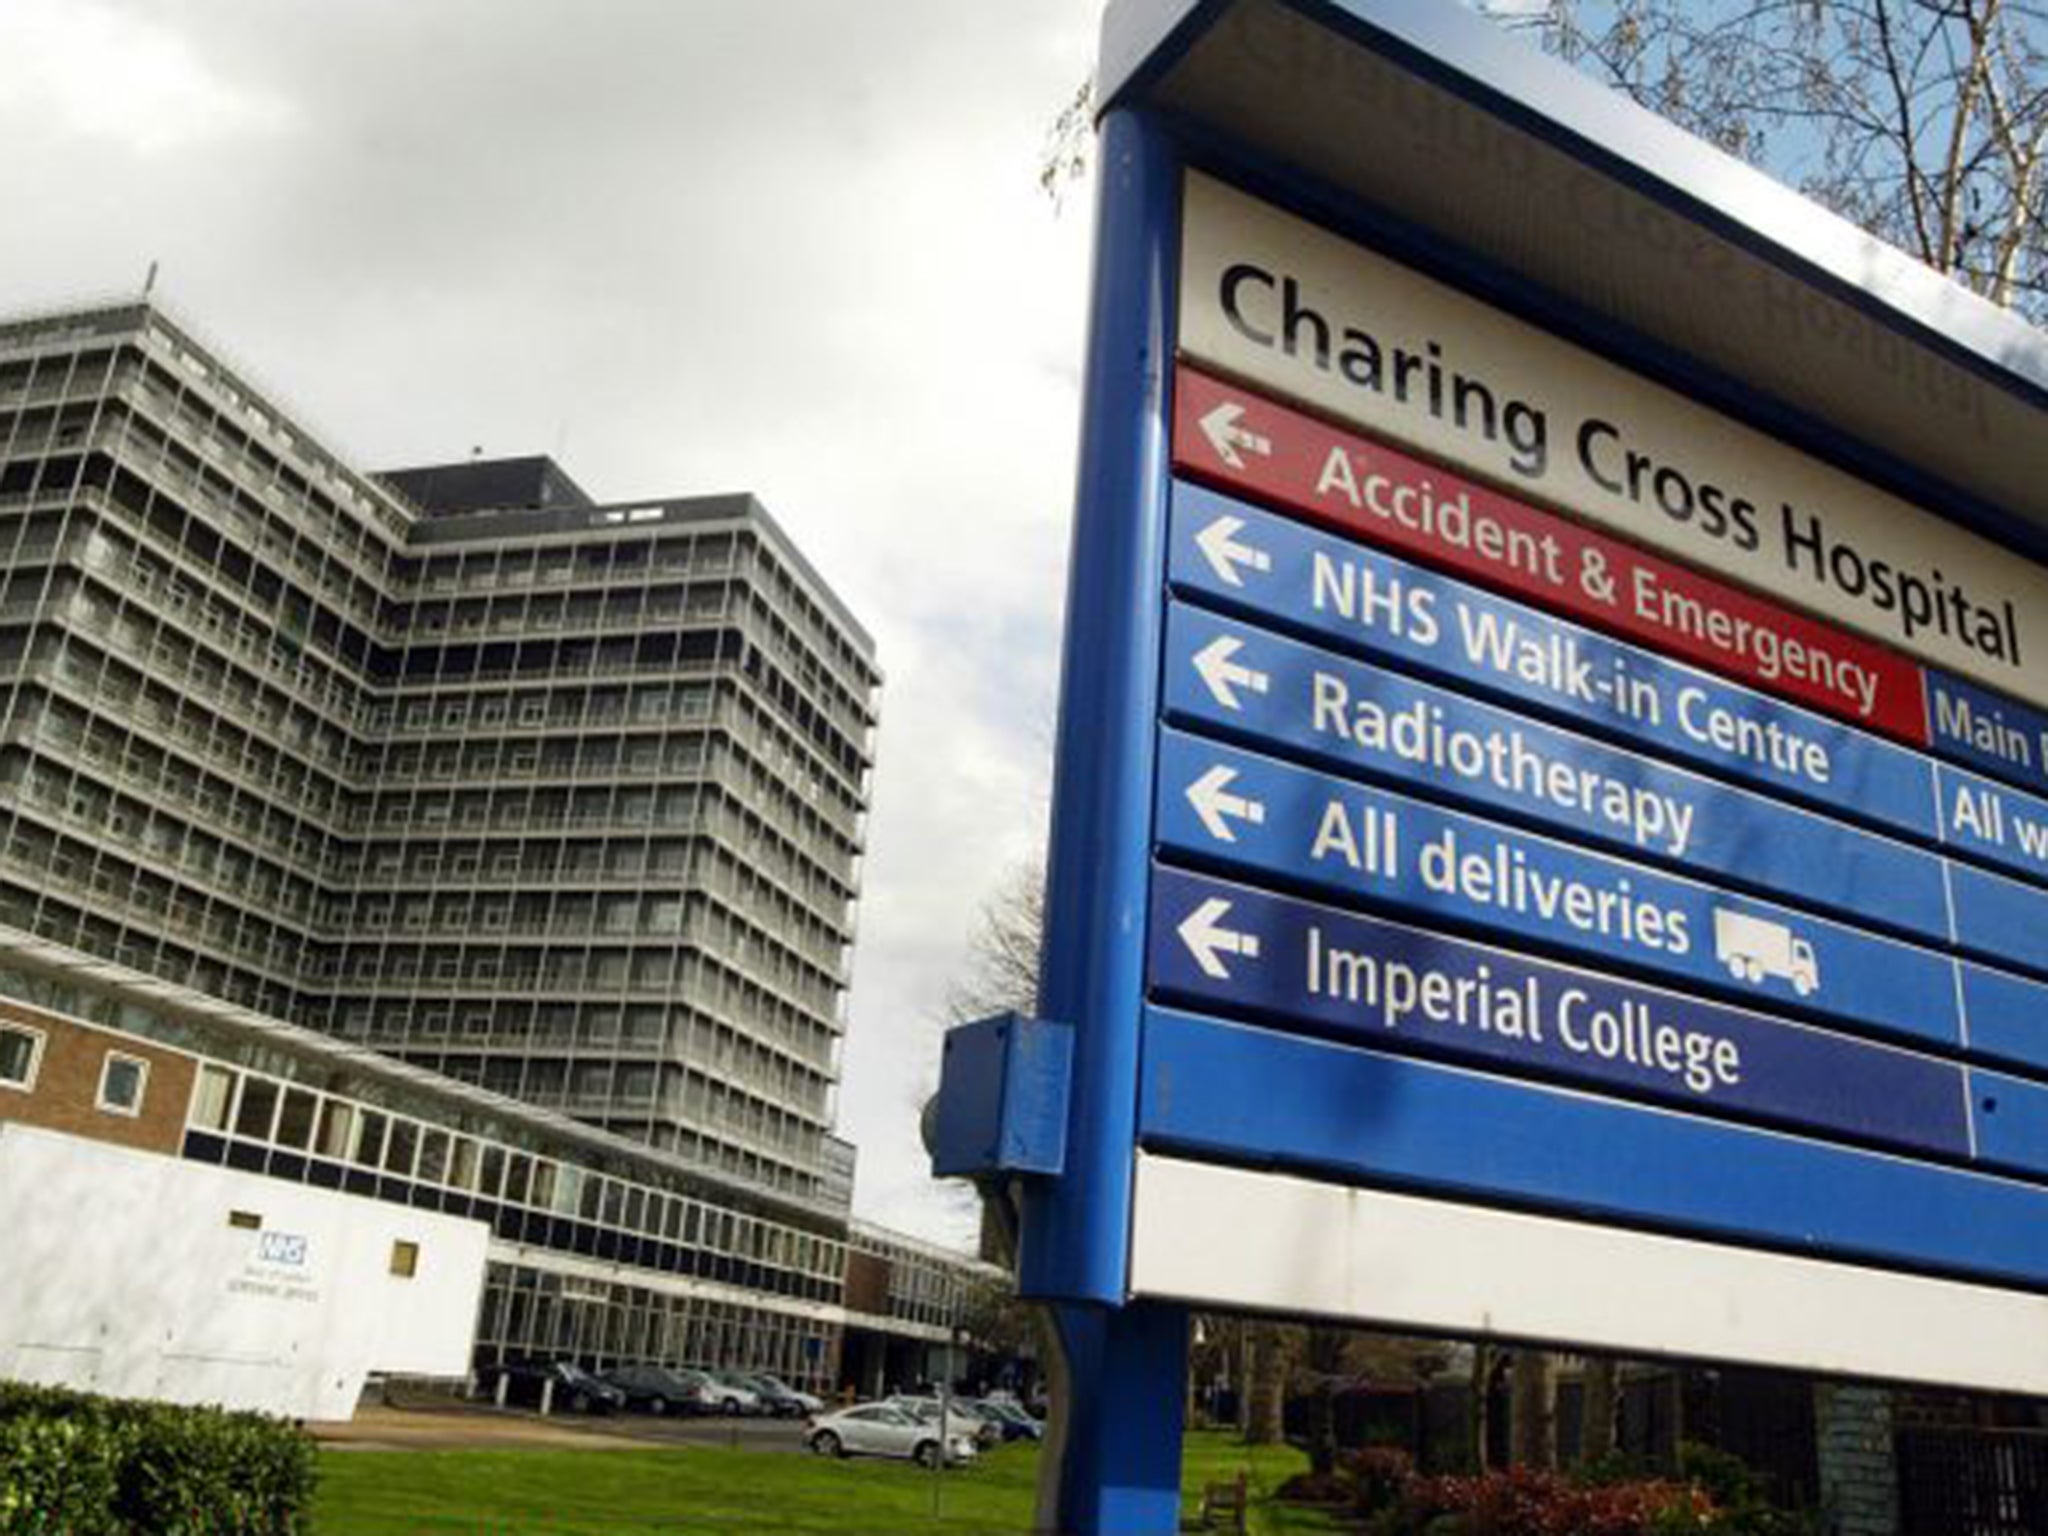 Charing Cross Hospital is part of Imperial College trust, which increased its income from private patients from £31m in 2010 to £43m in 2015